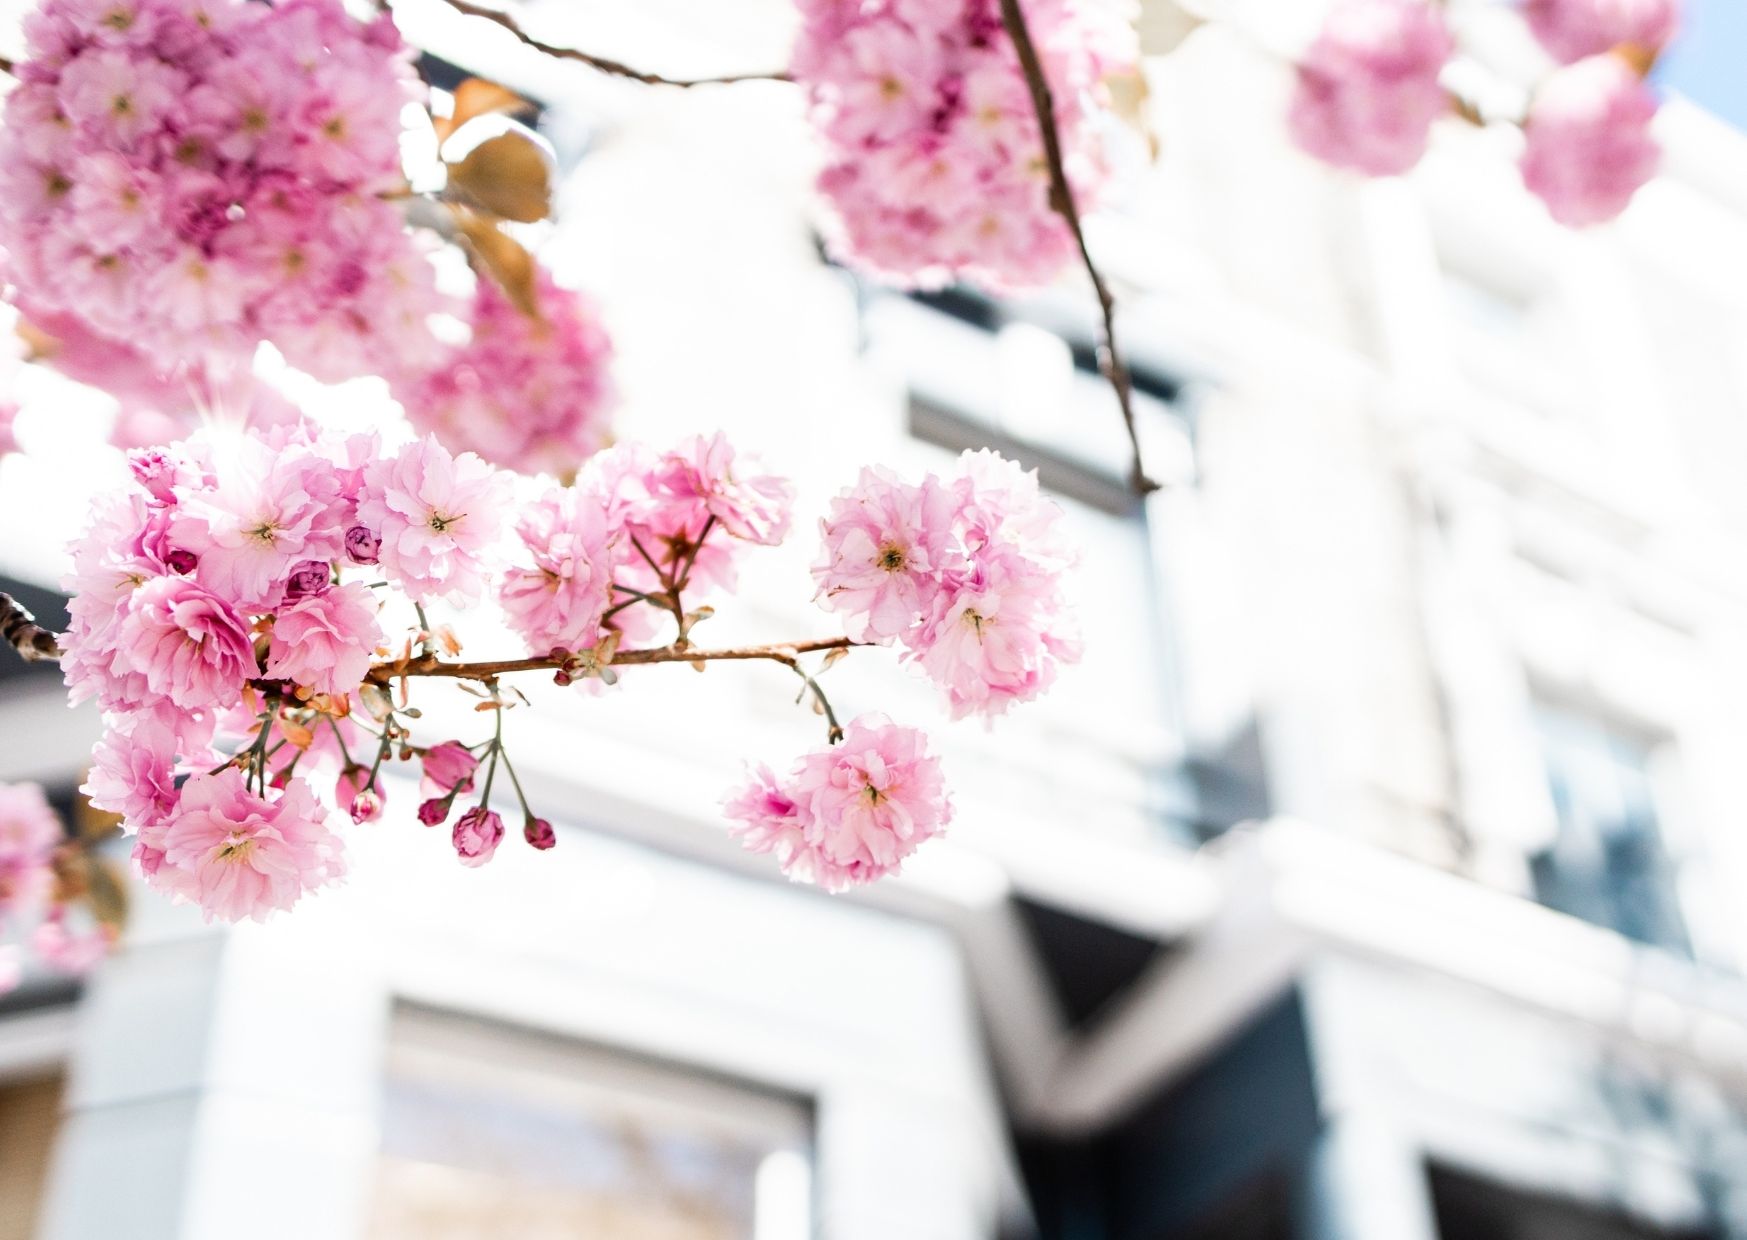 Where to find London’s Blossoms this Spring